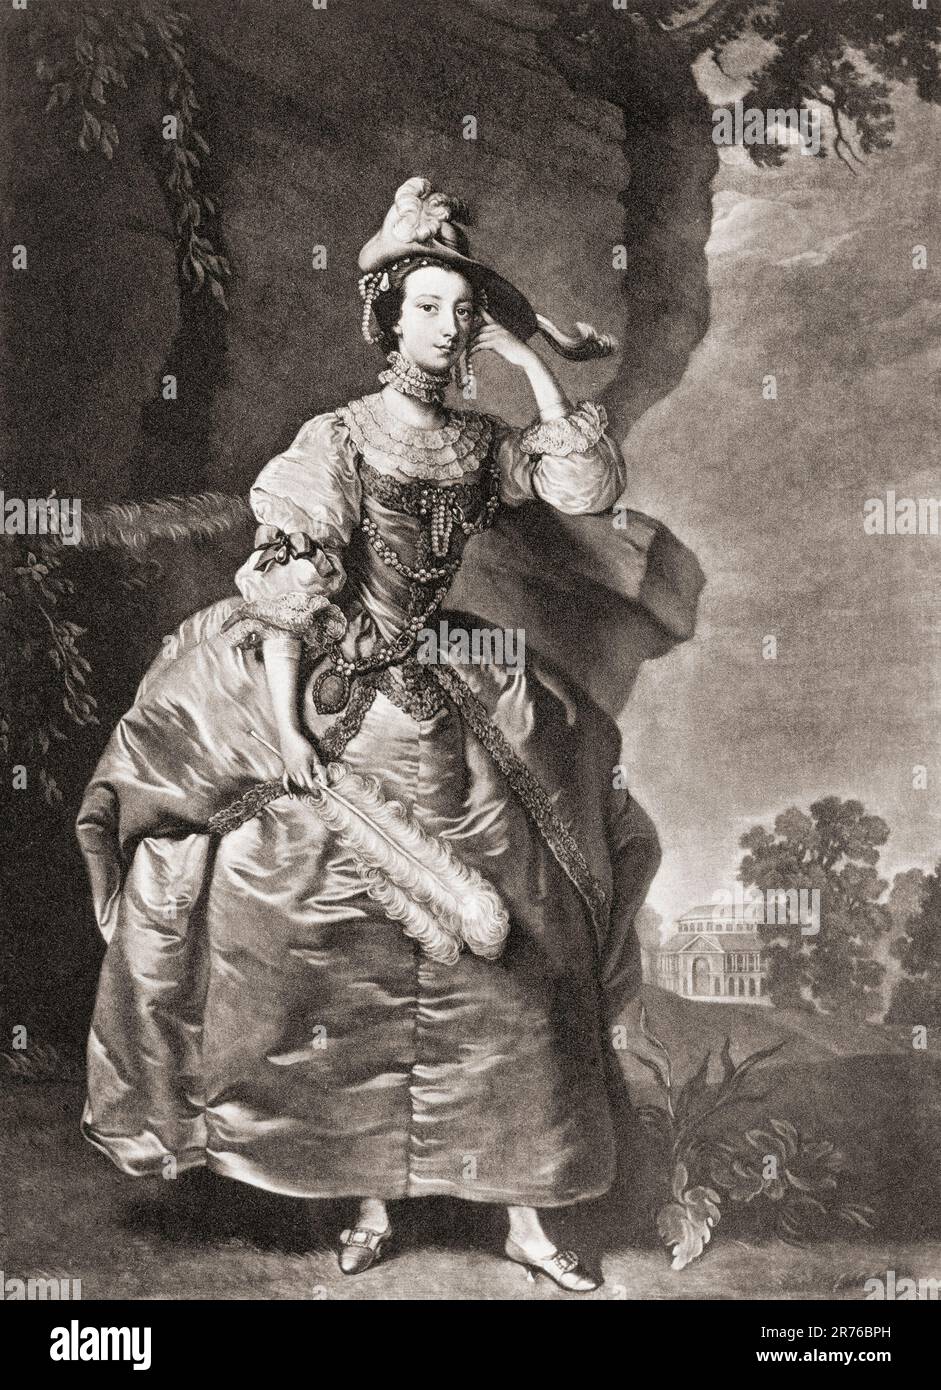 Mary Bertie, Duchess of Ancaster and Kesteven, ? - 1793, formerly Mary Panton.  Second wife of Peregrine Bertie, 3rd Duke of Ancaster and Kesteven. Mistress of the Robes to Charlotte of Mecklenburg-Strelitz, Queen Charlotte.  From Mezzotints, published 1904. Stock Photo